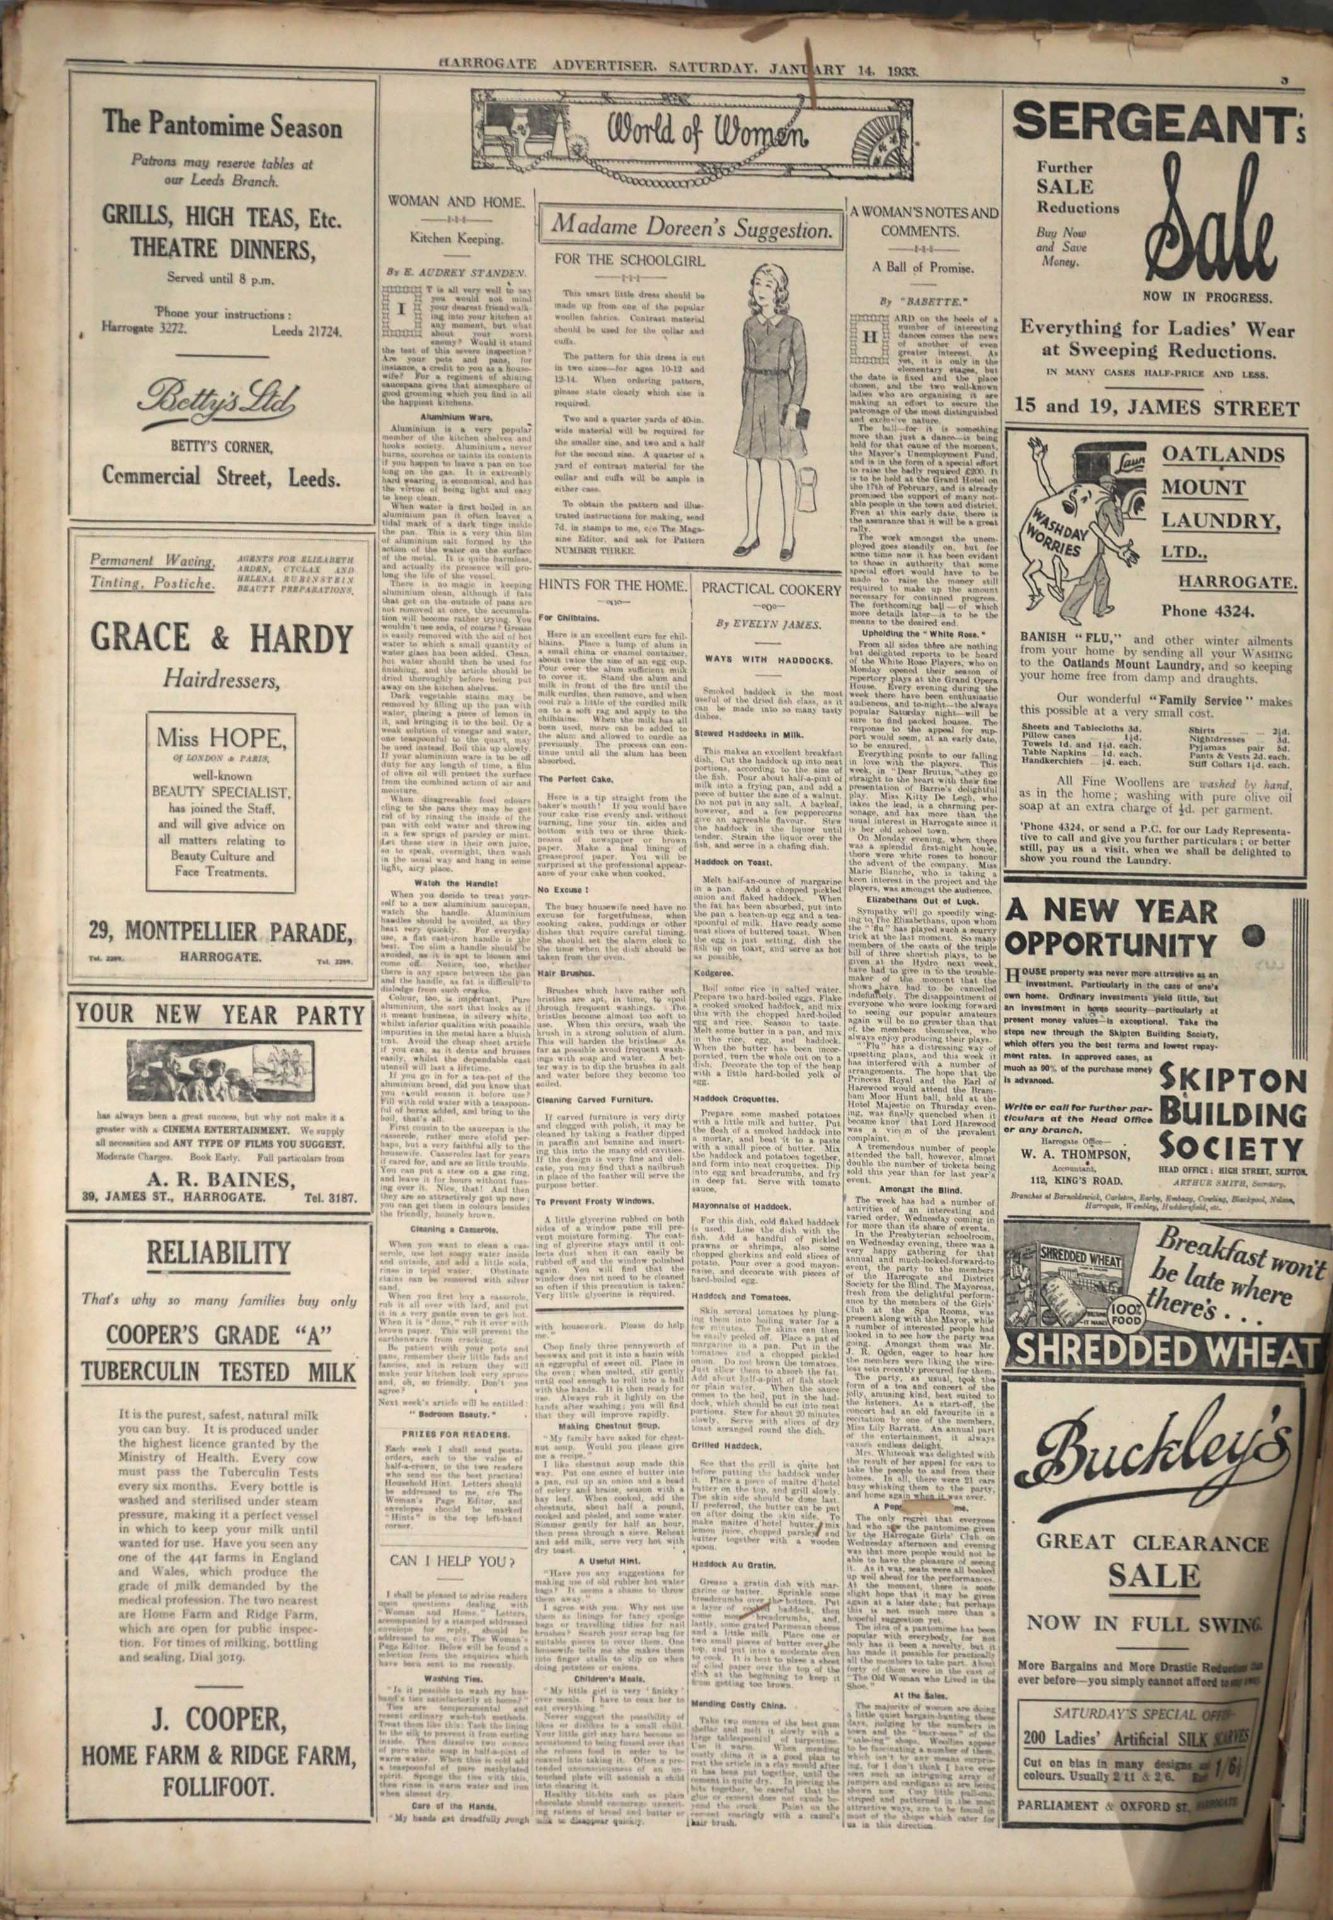 The Harrogate Advertiser 97th Year of Publication - Sat Jan 7th 1933 - price 2D by post for 12 - Image 2 of 4